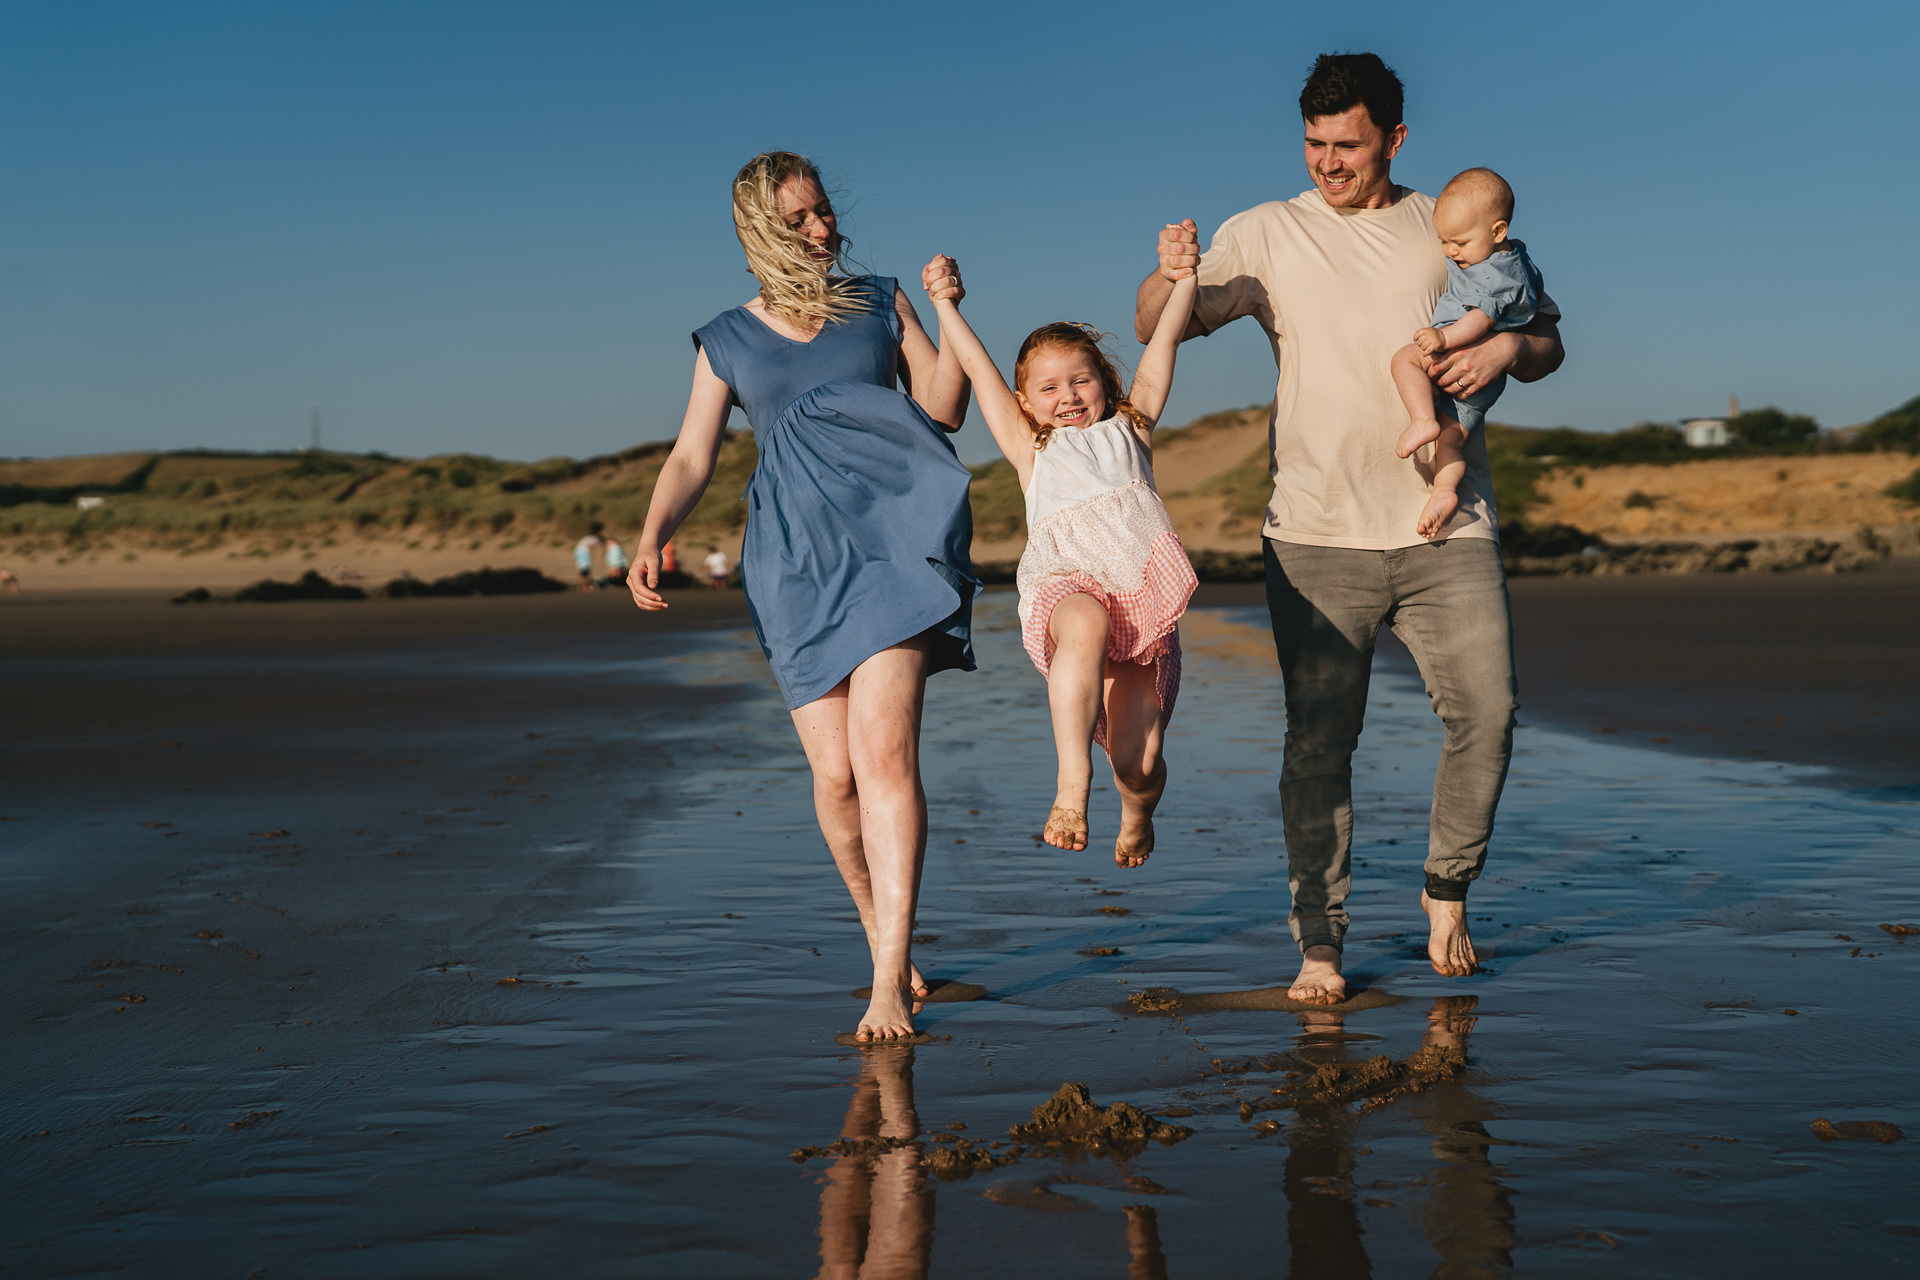 A family having fun together on the beach in North Devon, with two parents swinging a young girl between them whilst carrying a baby